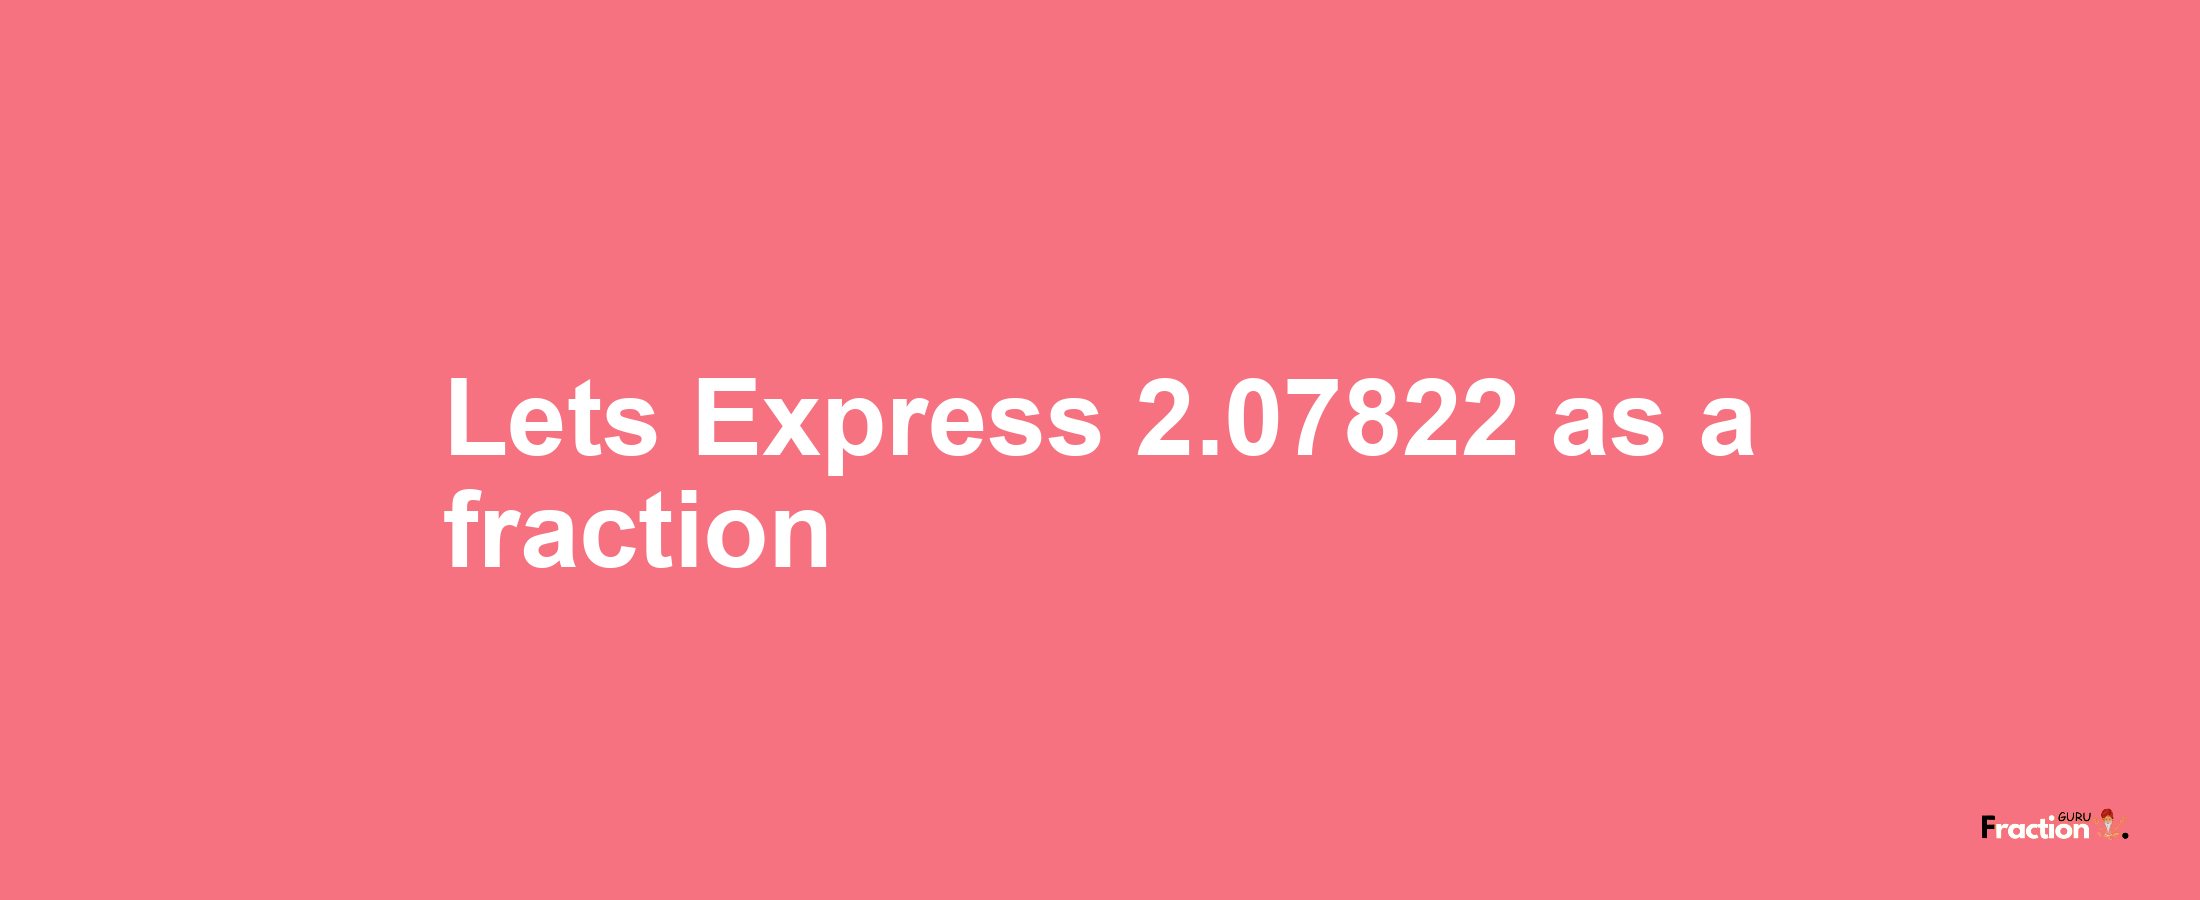 Lets Express 2.07822 as afraction